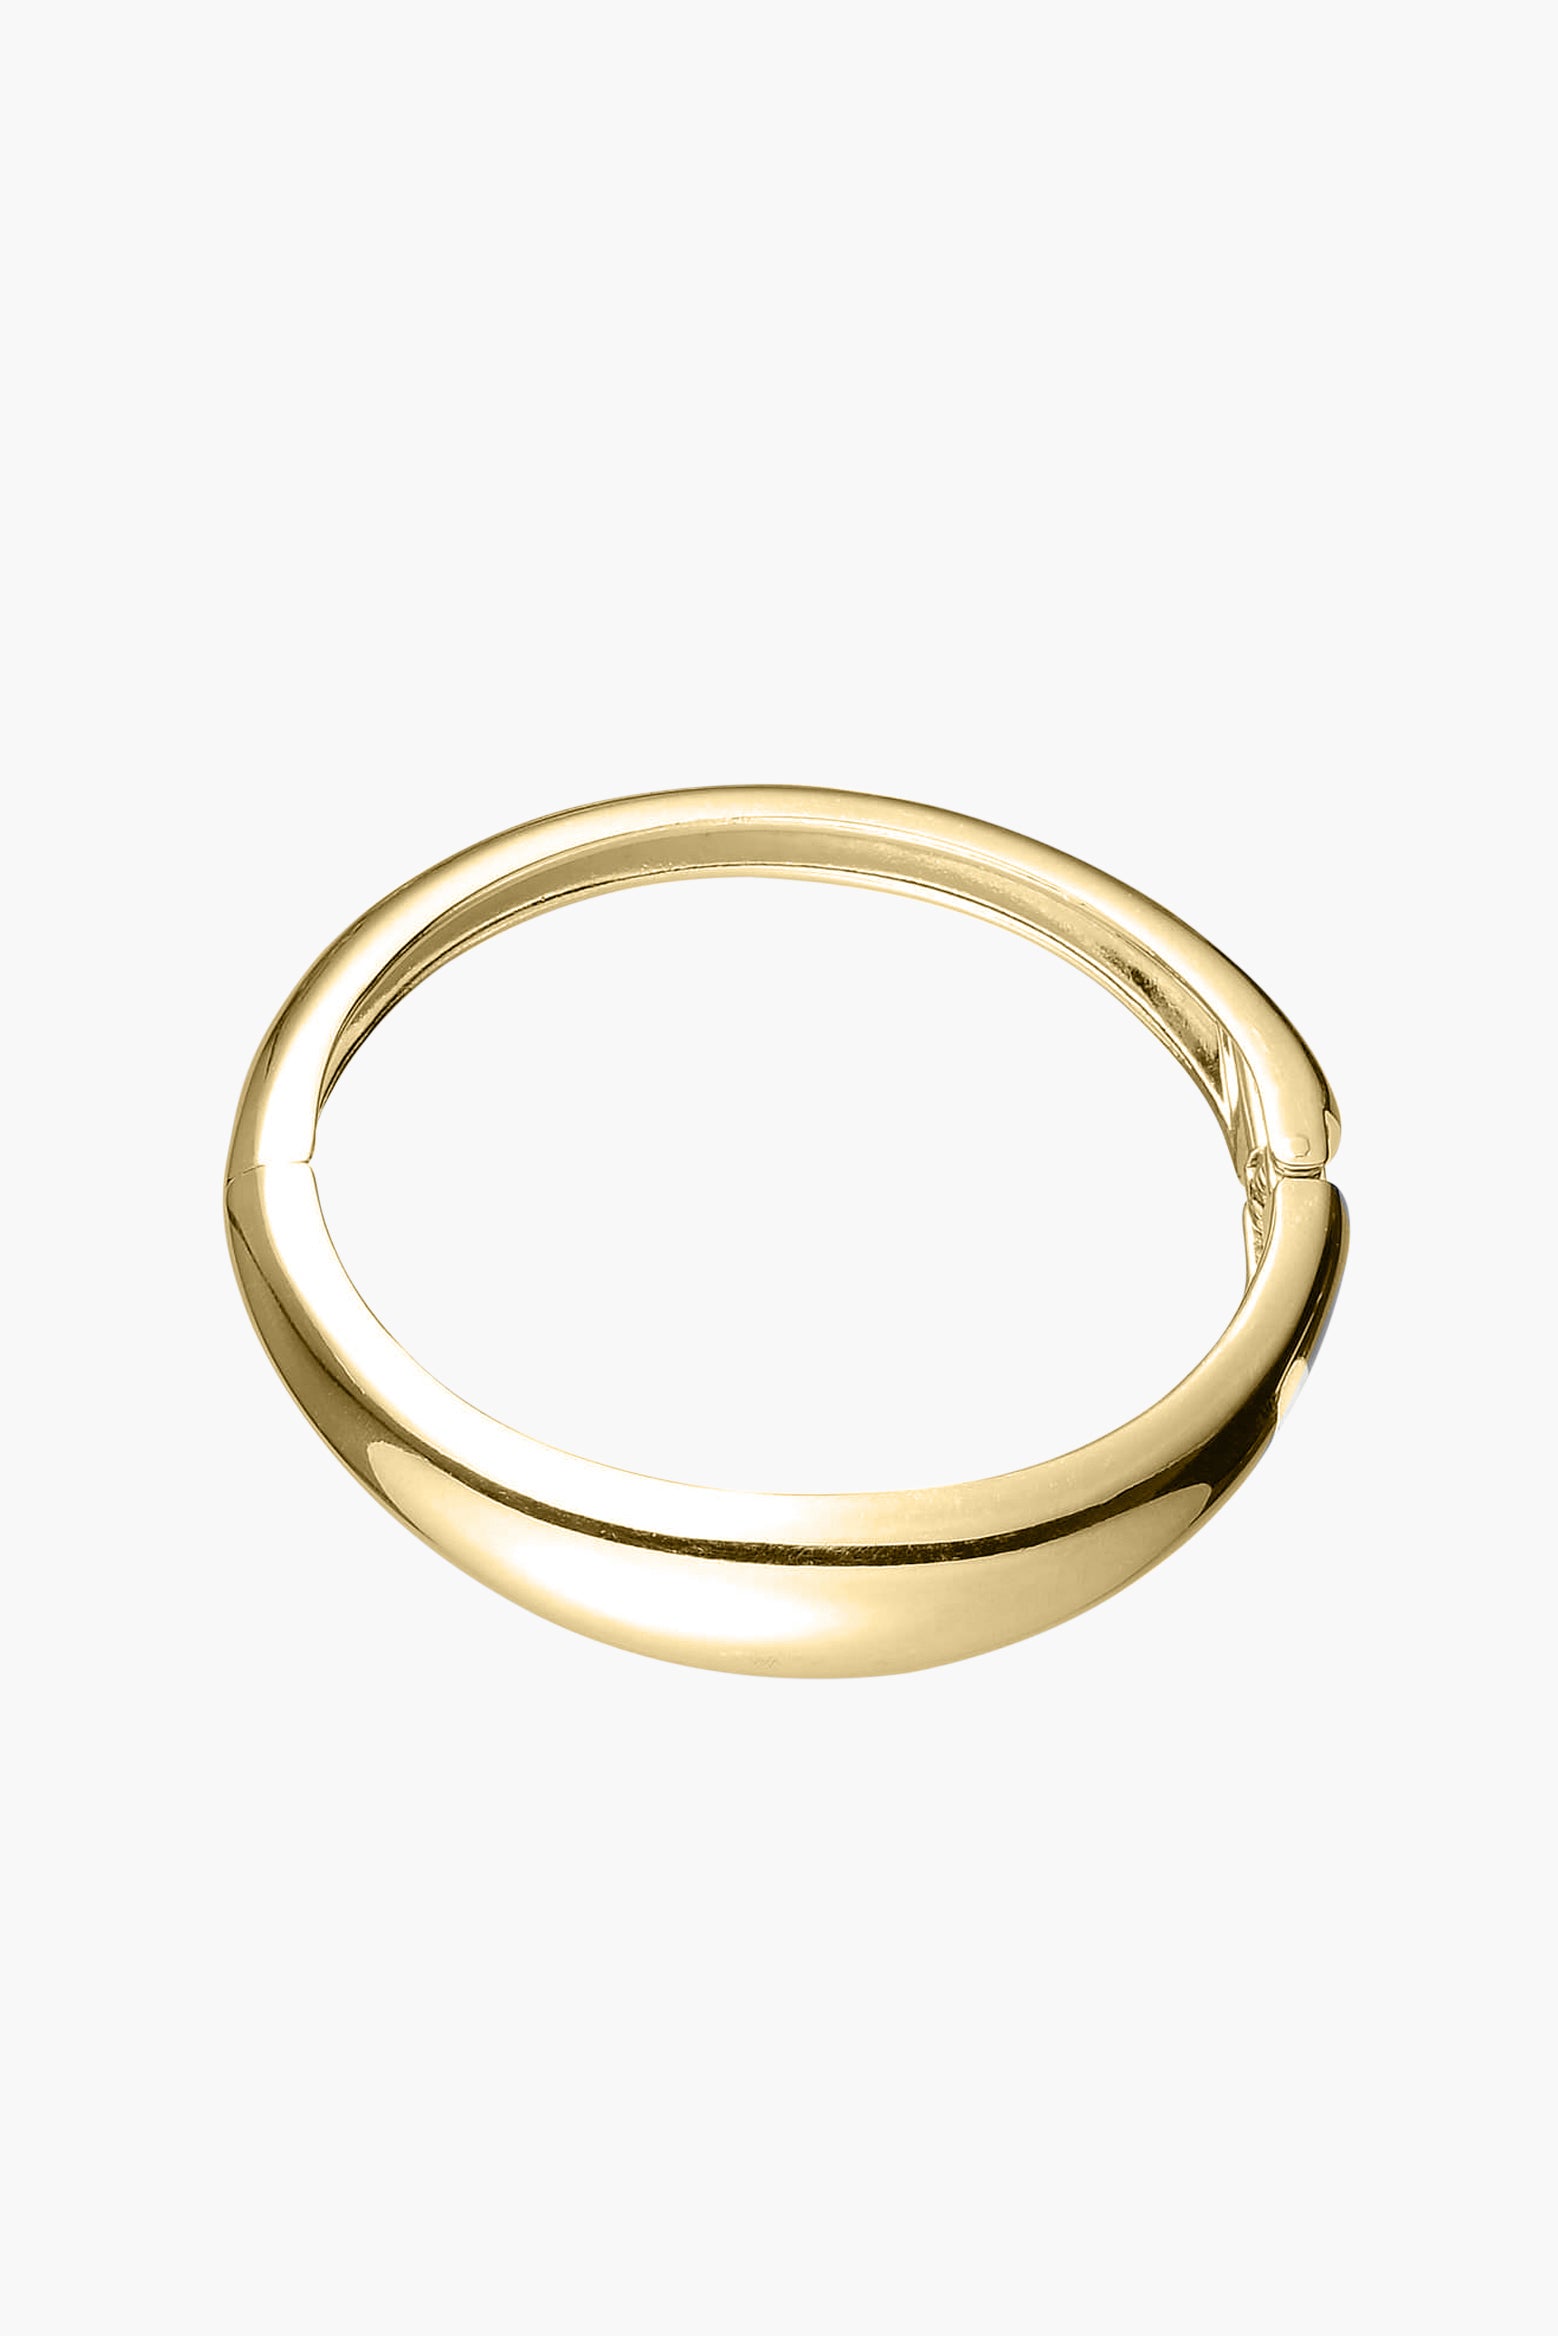 Anna Rossi Smooth Operator Bangle in Gold available at TNT The New Trend Australia